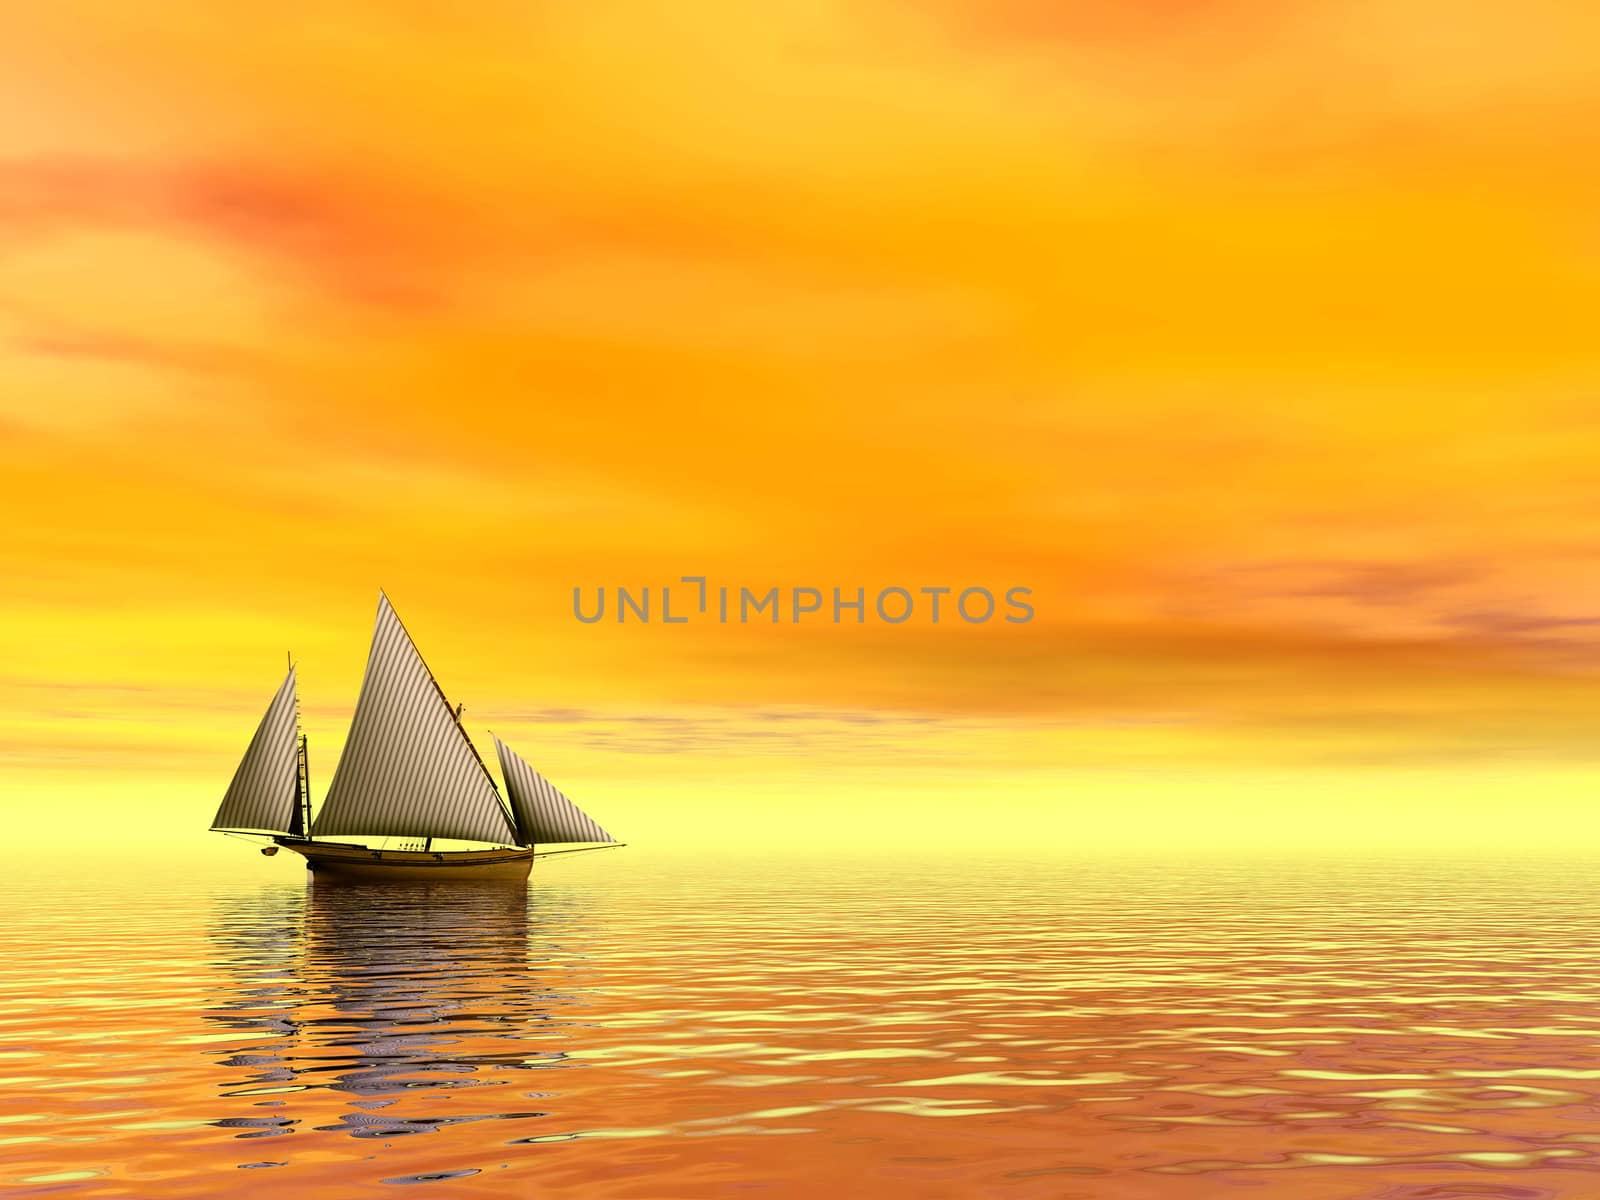 Small sailboat floating on quiet water by orange sunset